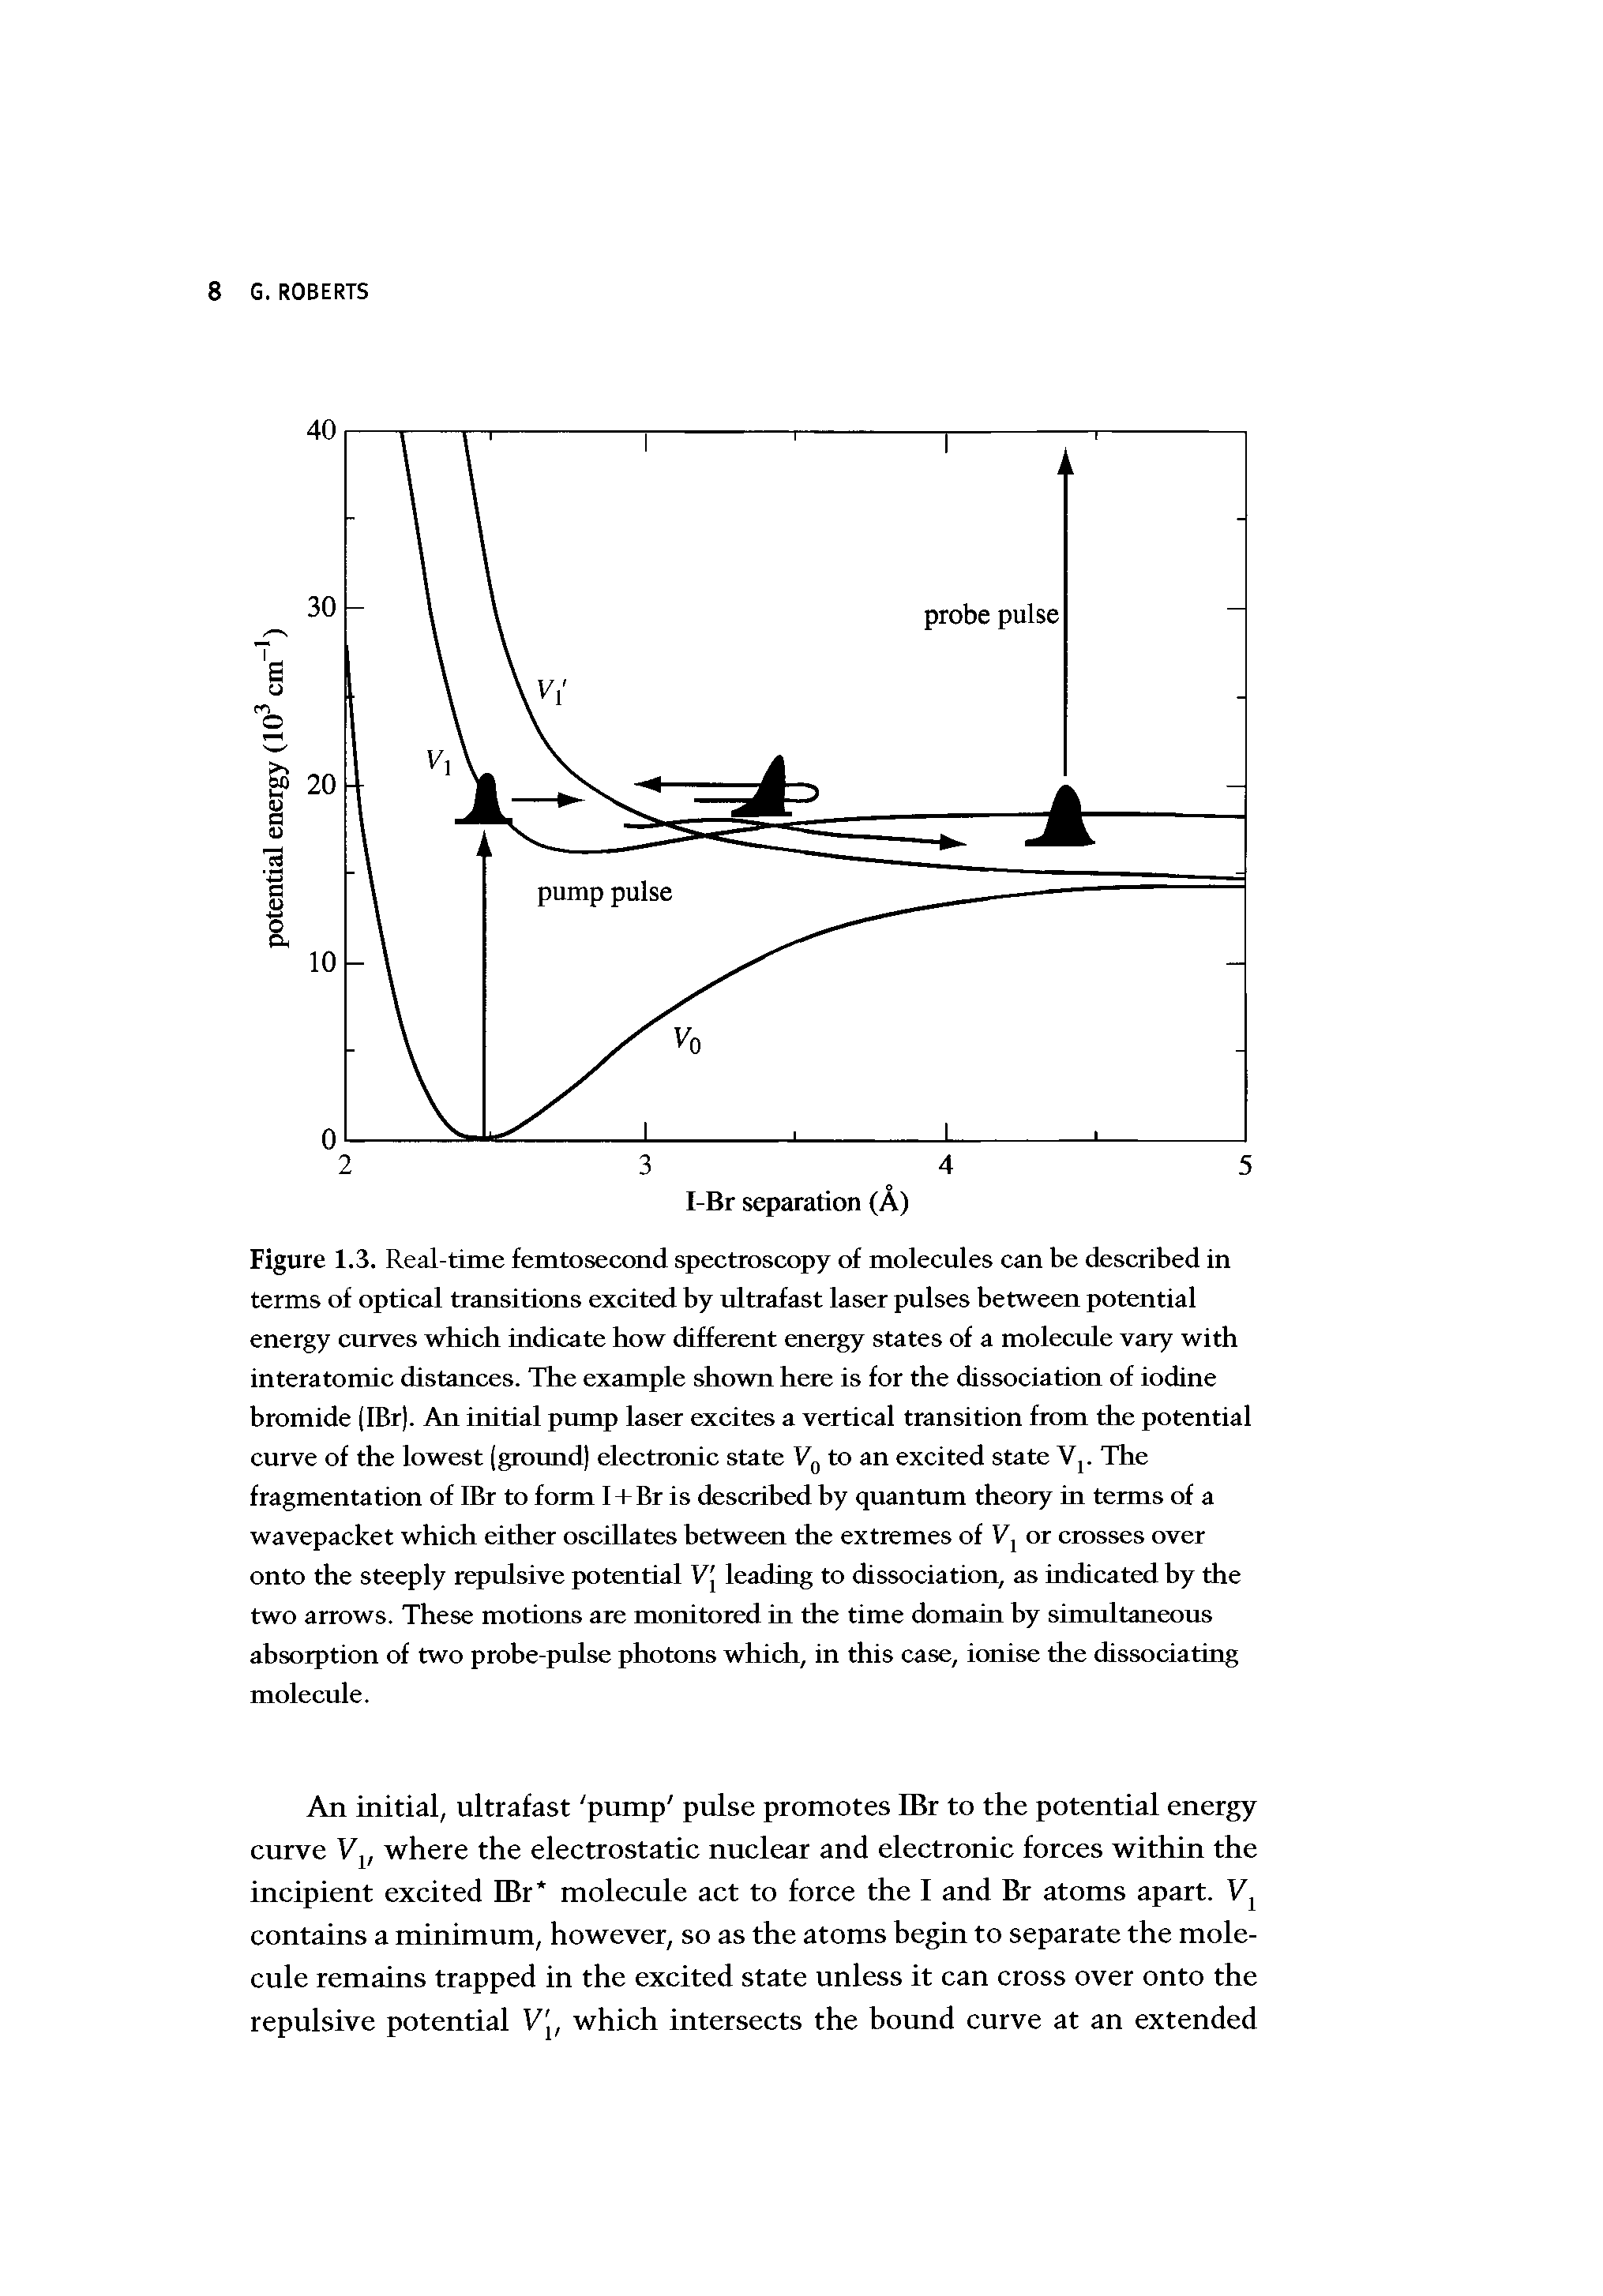 Figure 1.3. Real-time femtosecond spectroscopy of molecules can be described in terms of optical transitions excited by ultrafast laser pulses between potential energy curves which indicate how different energy states of a molecule vary with interatomic distances. The example shown here is for the dissociation of iodine bromide (IBr). An initial pump laser excites a vertical transition from the potential curve of the lowest (ground) electronic state Vg to an excited state Vj. The fragmentation of IBr to form I + Br is described by quantum theory in terms of a wavepacket which either oscillates between the extremes of or crosses over onto the steeply repulsive potential V[ leading to dissociation, as indicated by the two arrows. These motions are monitored in the time domain by simultaneous absorption of two probe-pulse photons which, in this case, ionise the dissociating molecule.